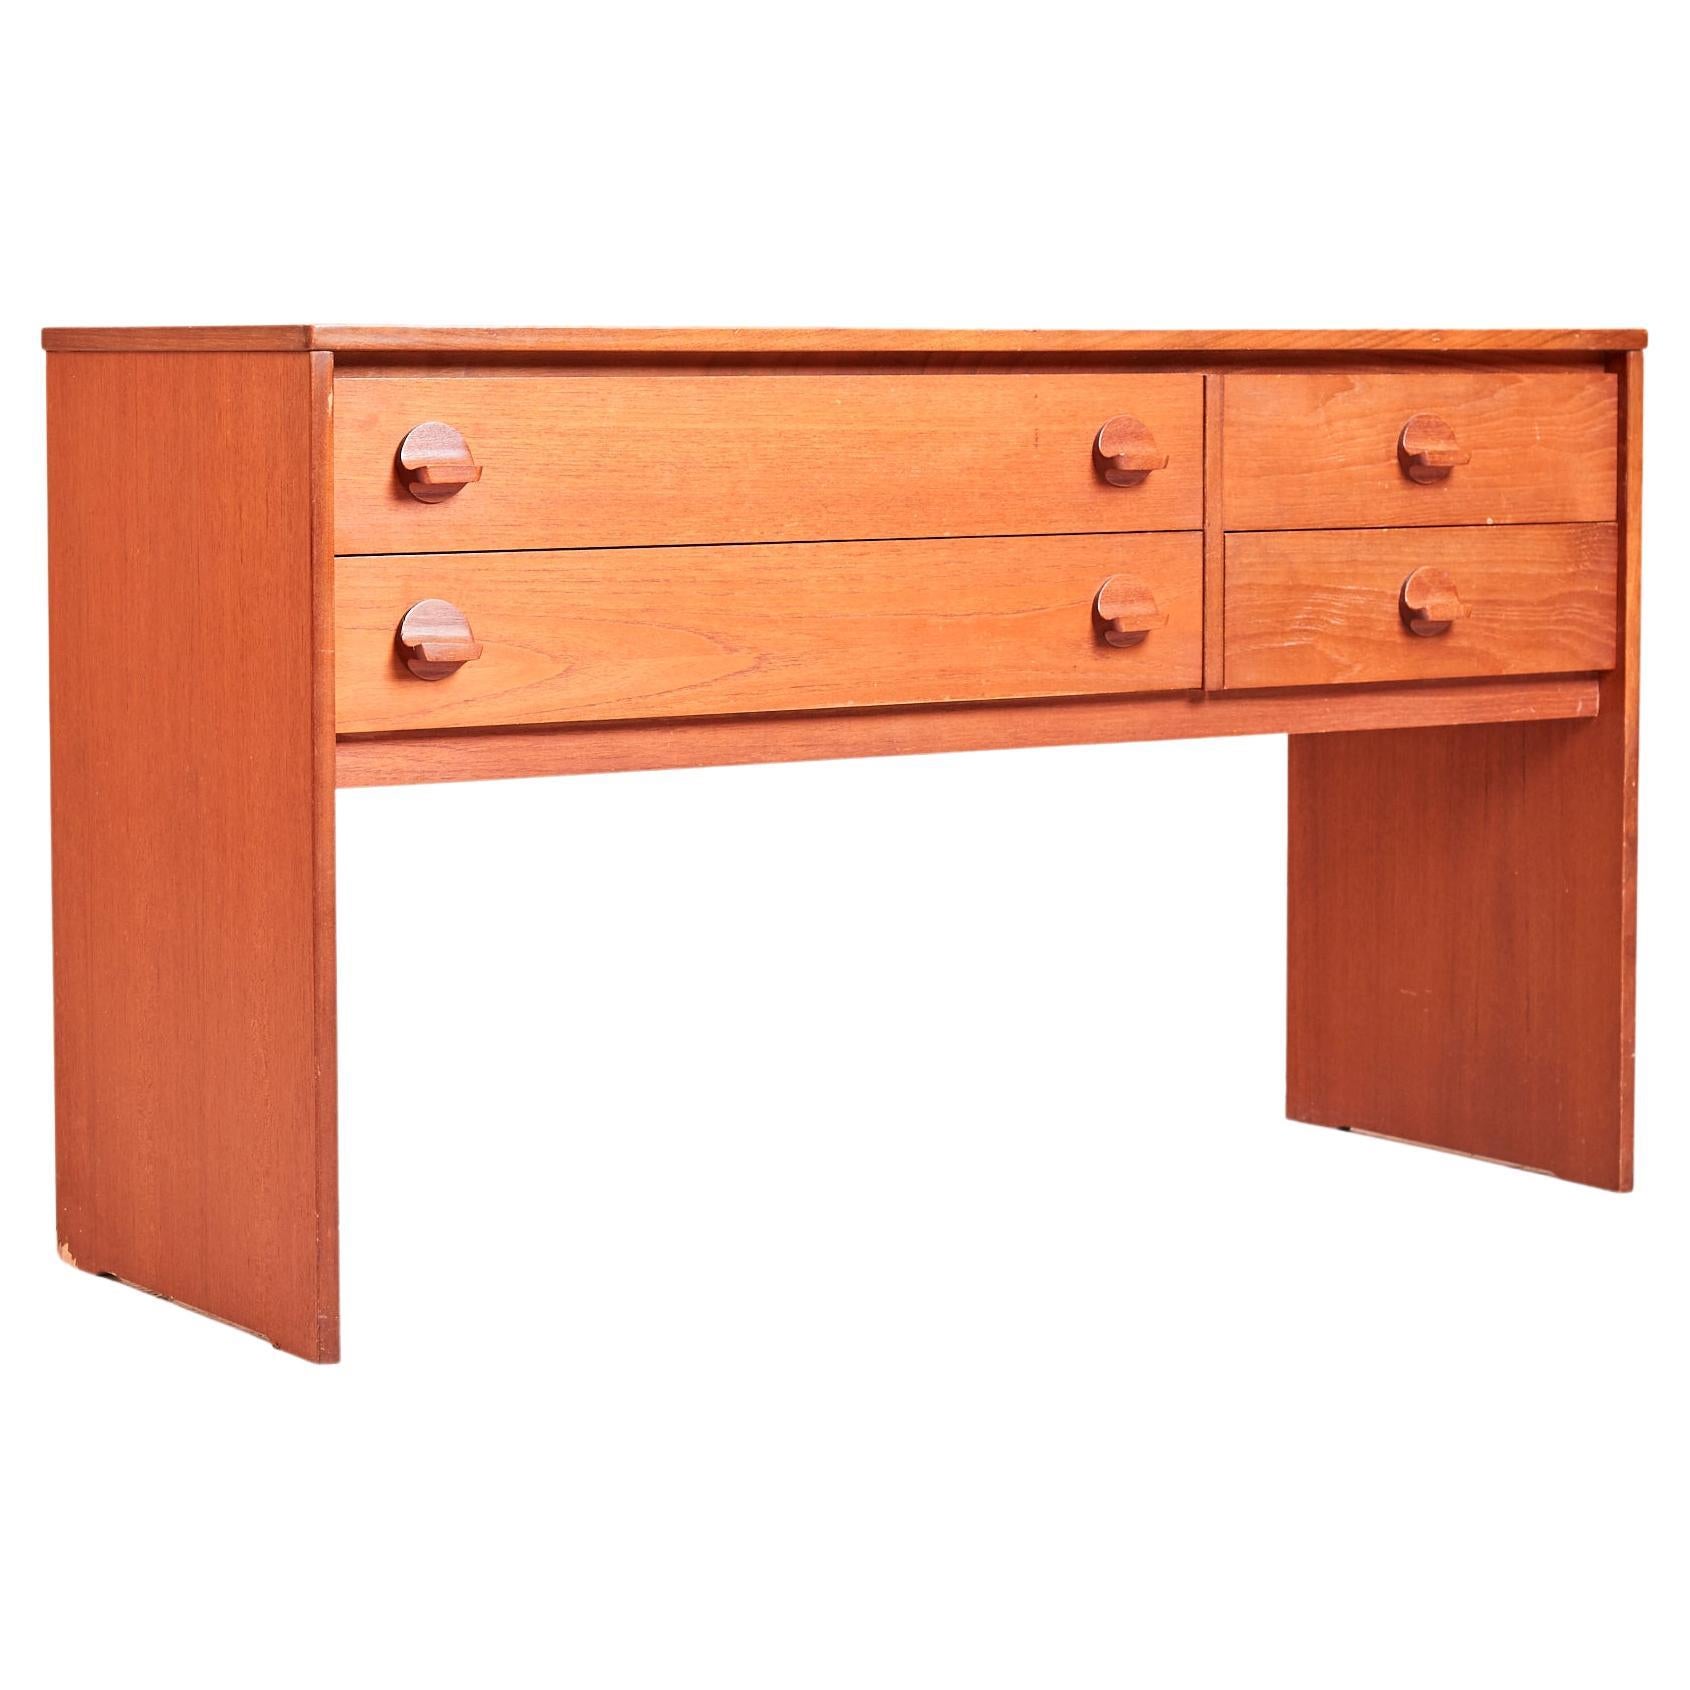 Stag Console With Drawers In Teak, Mid Century, John & Sylvia Reid, 1960s